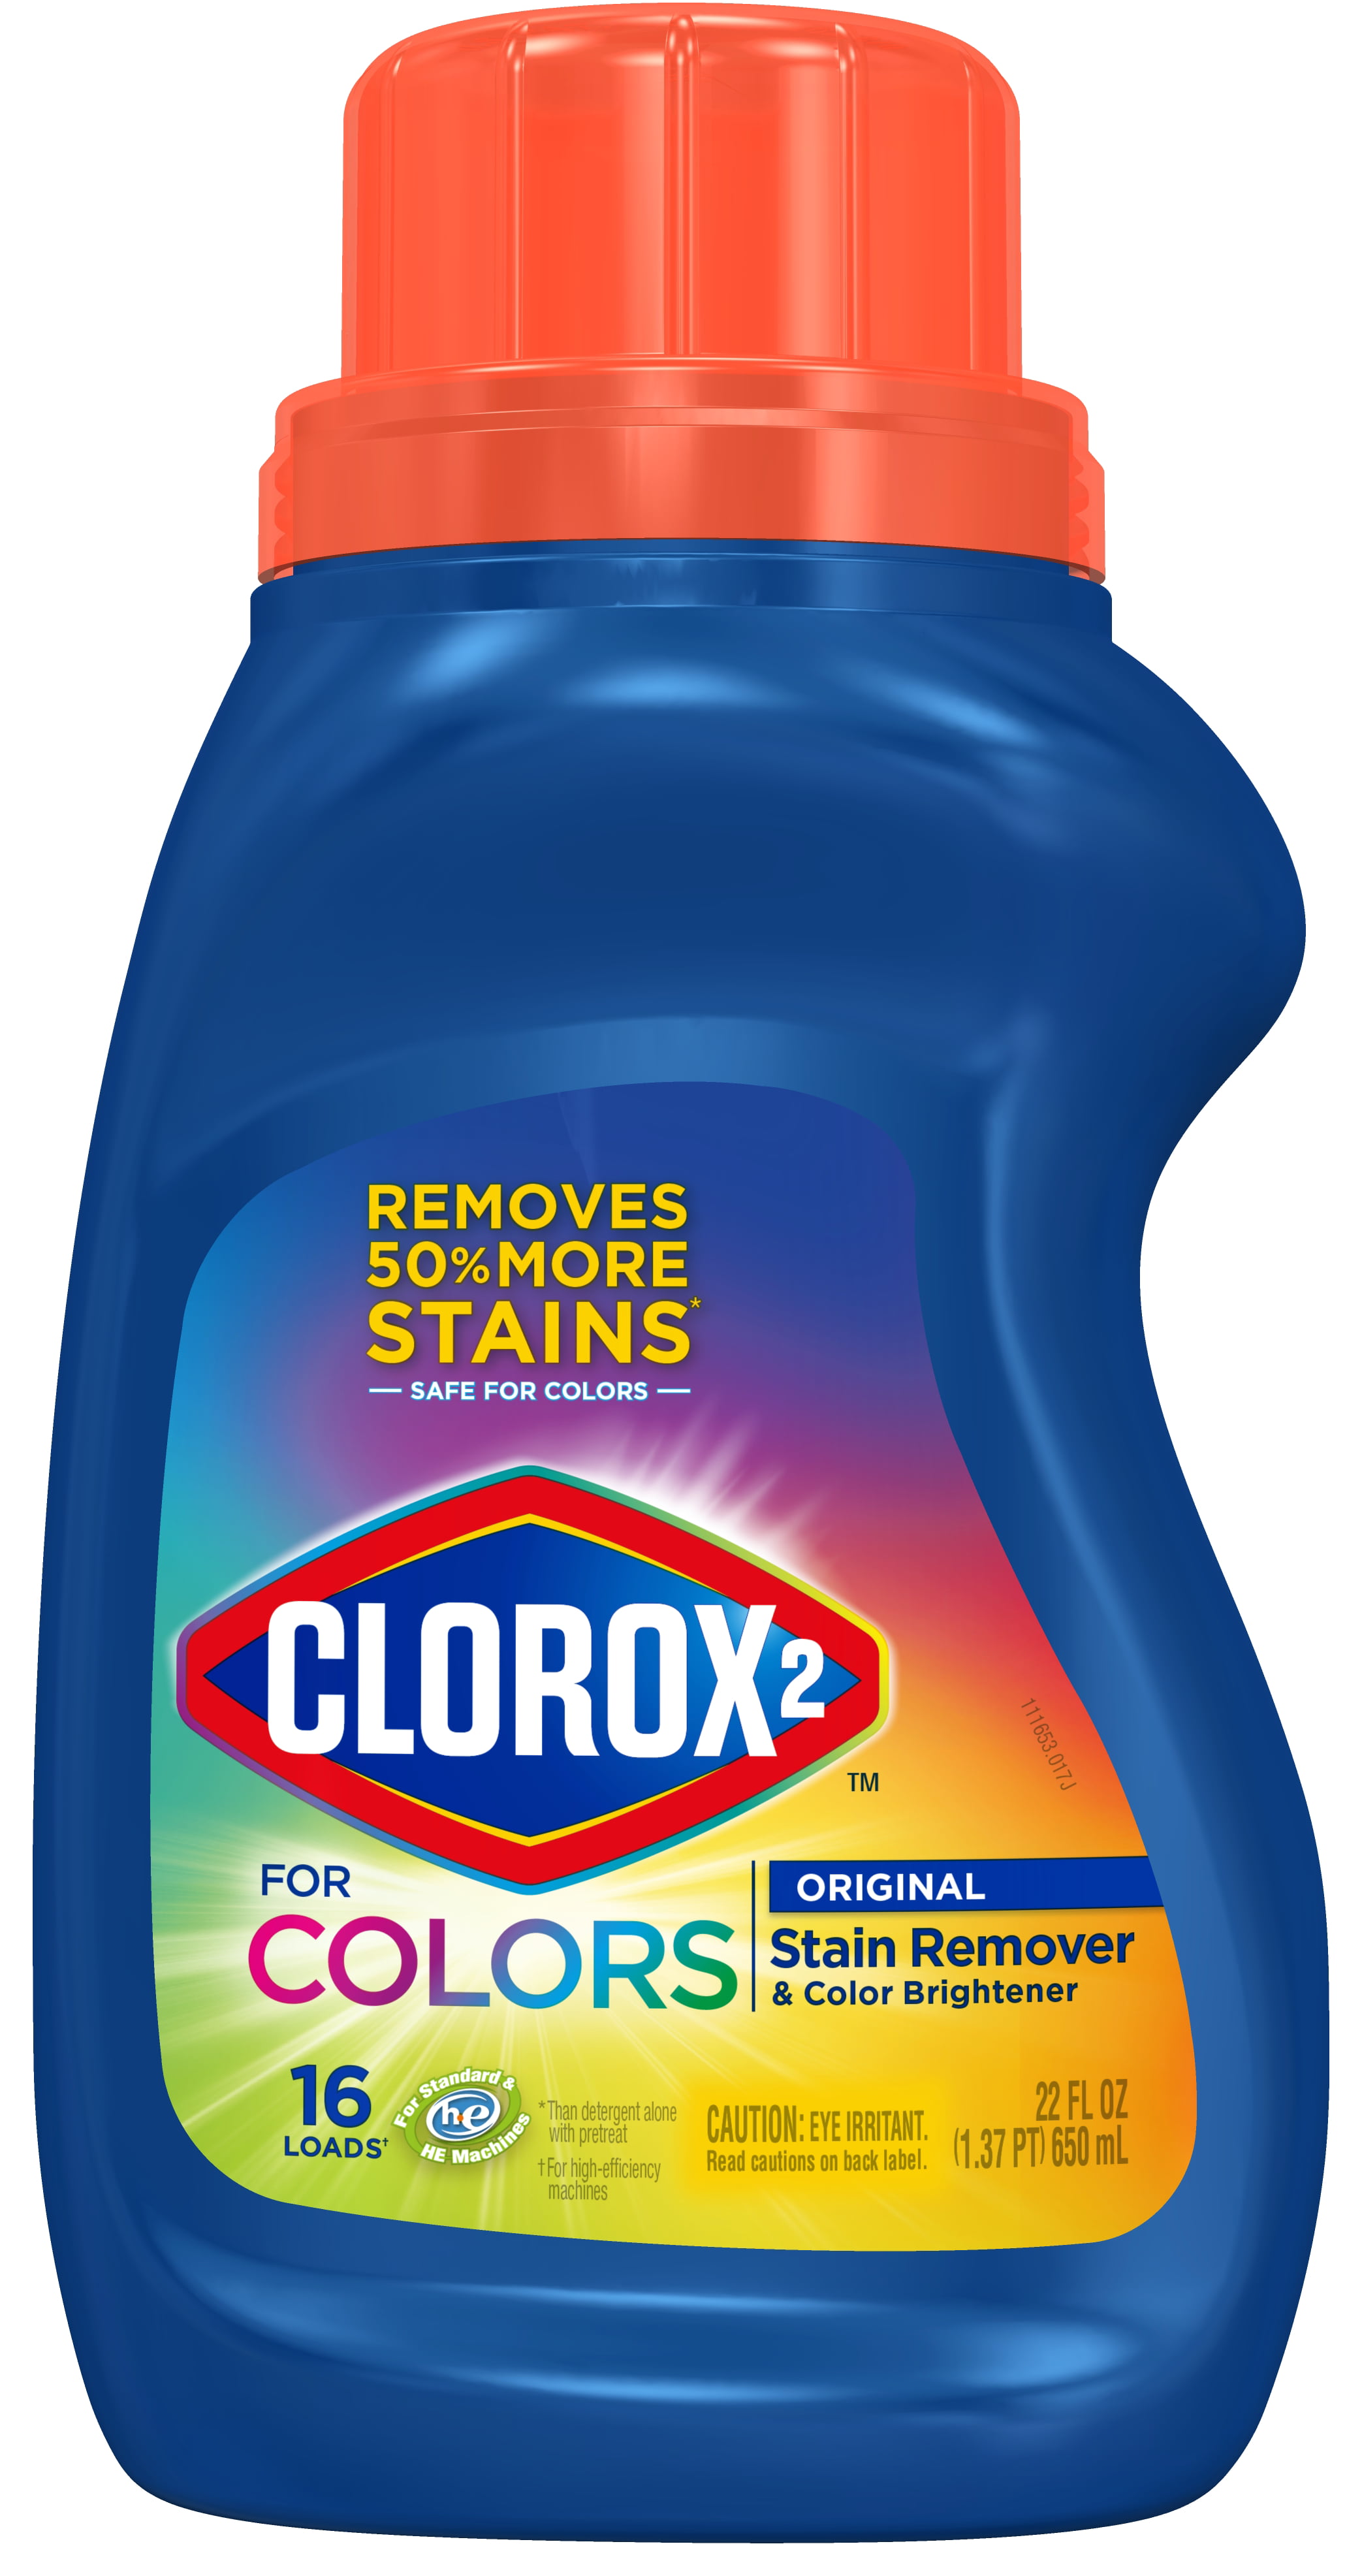 clorox-2-for-colors-stain-remover-and-color-brightener-22-ounces